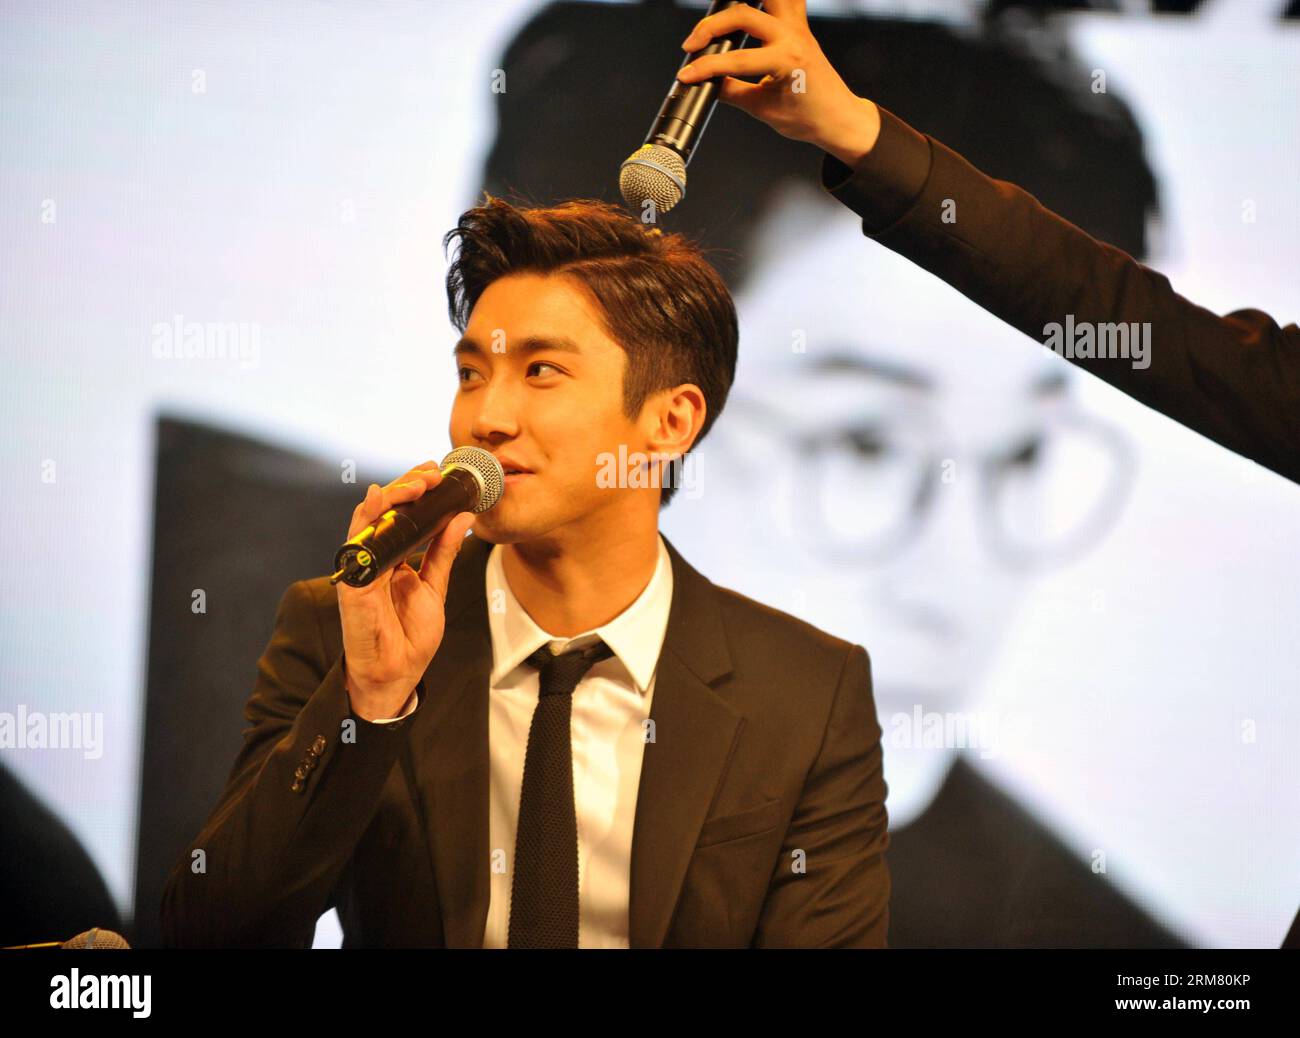 (140322) -- BEIJING, March 22, 2014 (Xinhua) -- Member of Super Junior Lee Choi Siwon speaks during a new album release press conference in Beijing, capital of China, March 22, 2014. Press conference of Super Junior s new album SWING is held here on Saturday. (Xinhua/Cheng Tingting) (cjq) CHINA-BEIJING-SUPER JUNIOR-ALBUM RELEASE (CN) PUBLICATIONxNOTxINxCHN   Beijing March 22 2014 XINHUA member of Super Junior Lee Choi  Speaks during a New Album Release Press Conference in Beijing Capital of China March 22 2014 Press Conference of Super Junior S New Album Swing IS Hero Here ON Saturday XINHUA C Stock Photo